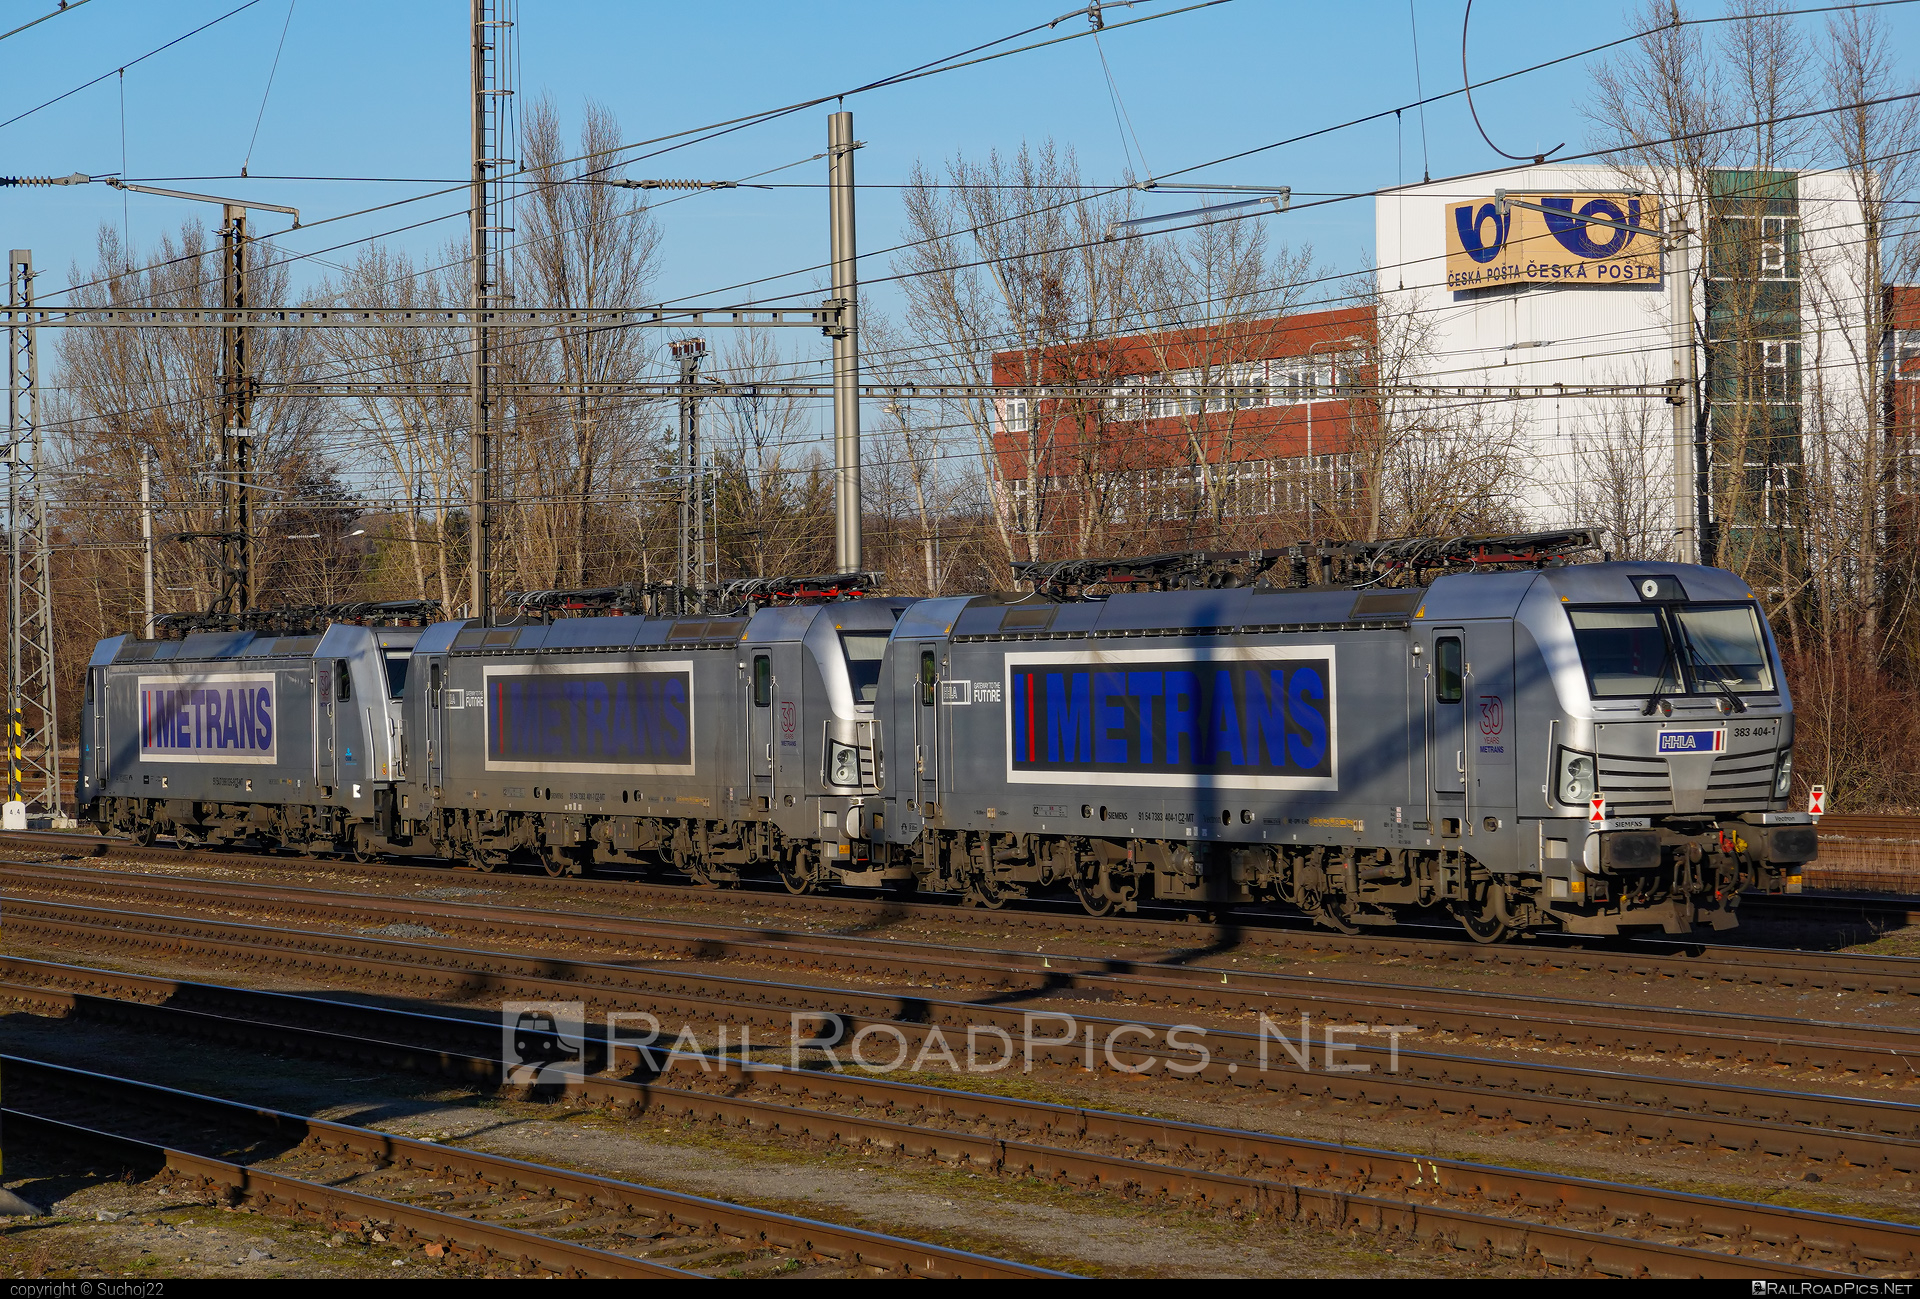 Siemens Vectron MS - 383 404-1 operated by METRANS, a.s. #hhla #metrans #siemens #siemensVectron #siemensVectronMS #vectron #vectronMS